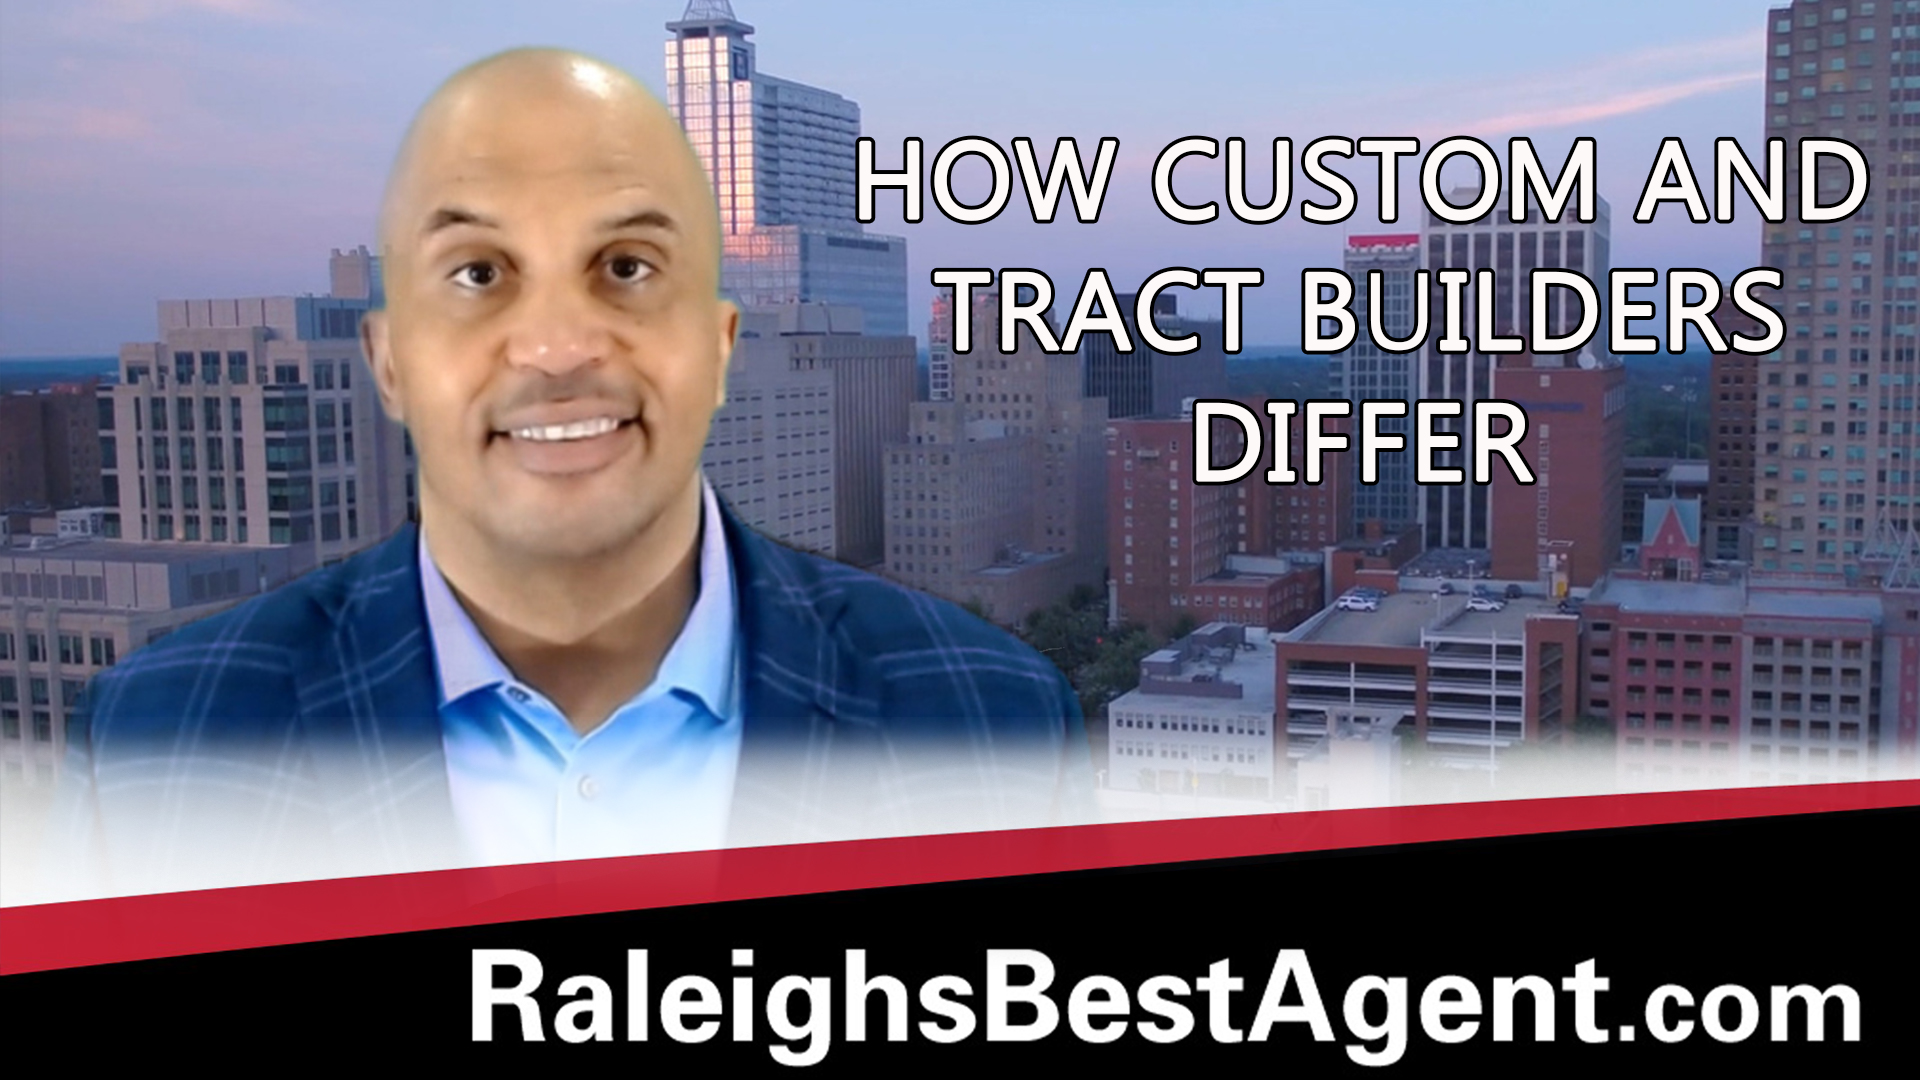 What’s the Difference Between a Custom Builder and Tract Builder?